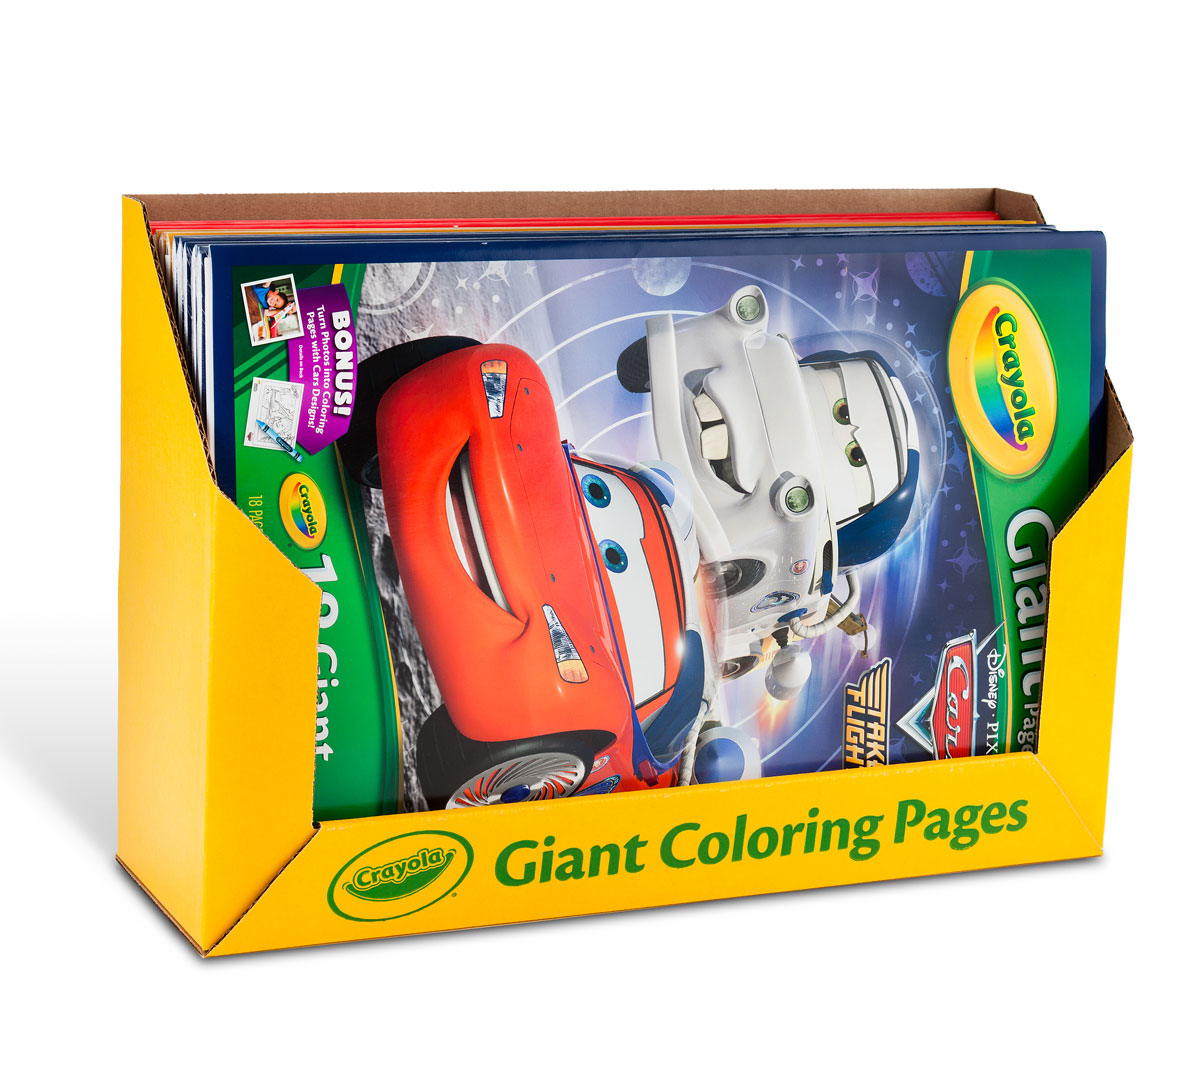 Download Giant Coloring Pages Assorted Bulk Case | Crayola